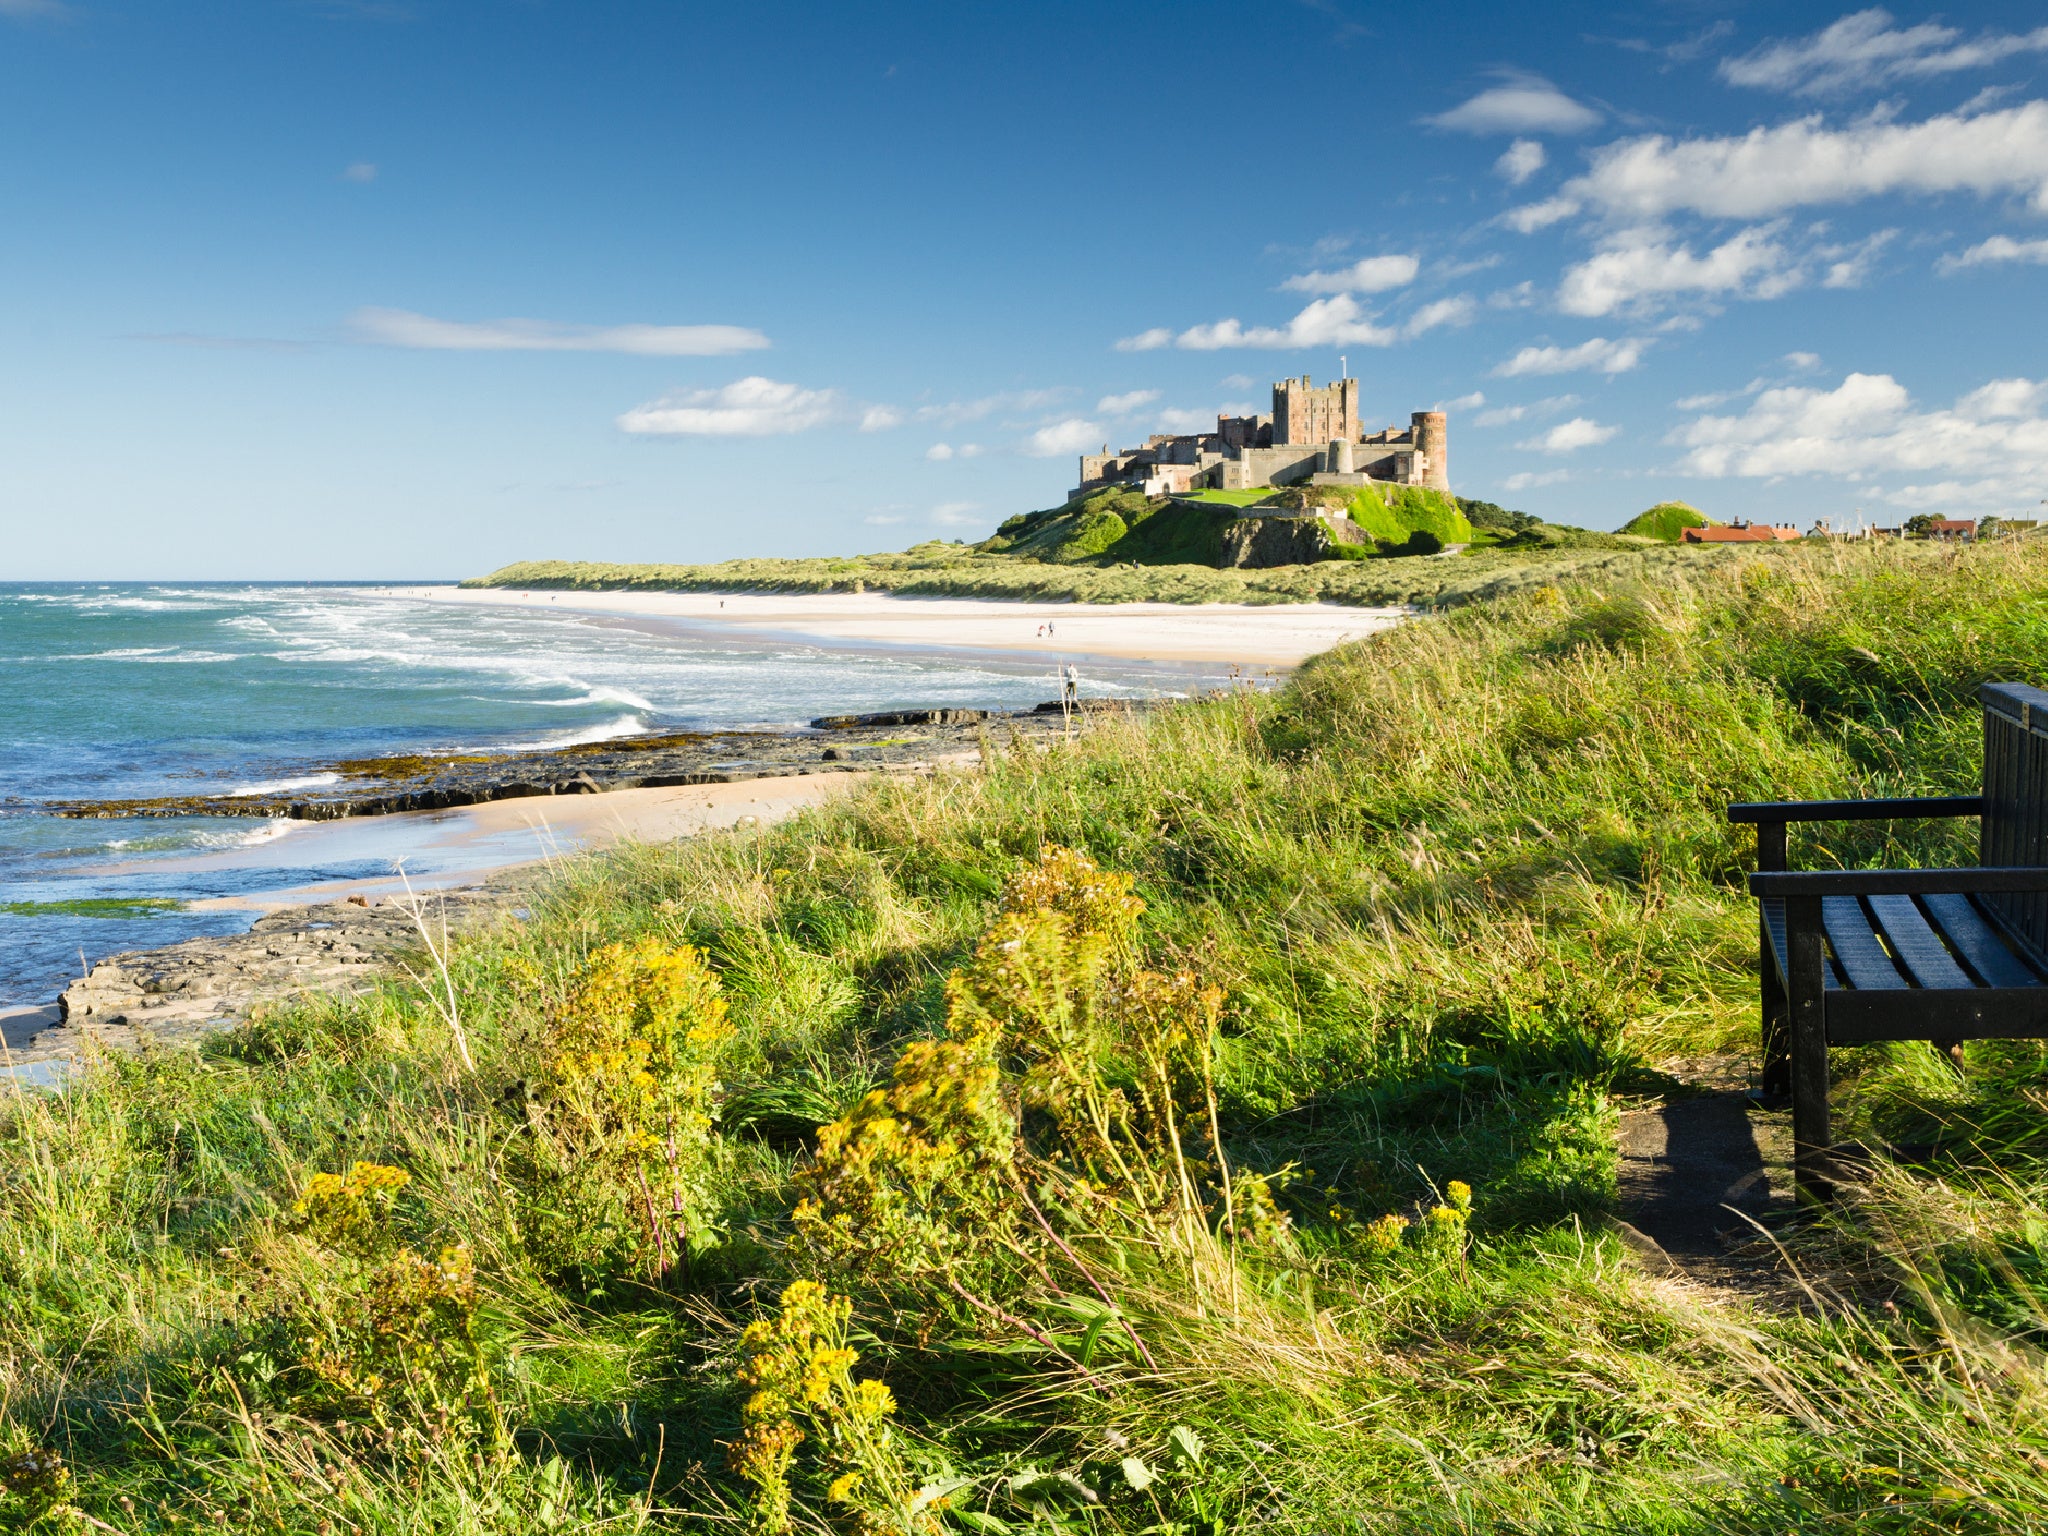 Bamburgh has topped the list for the fourth consecutive year